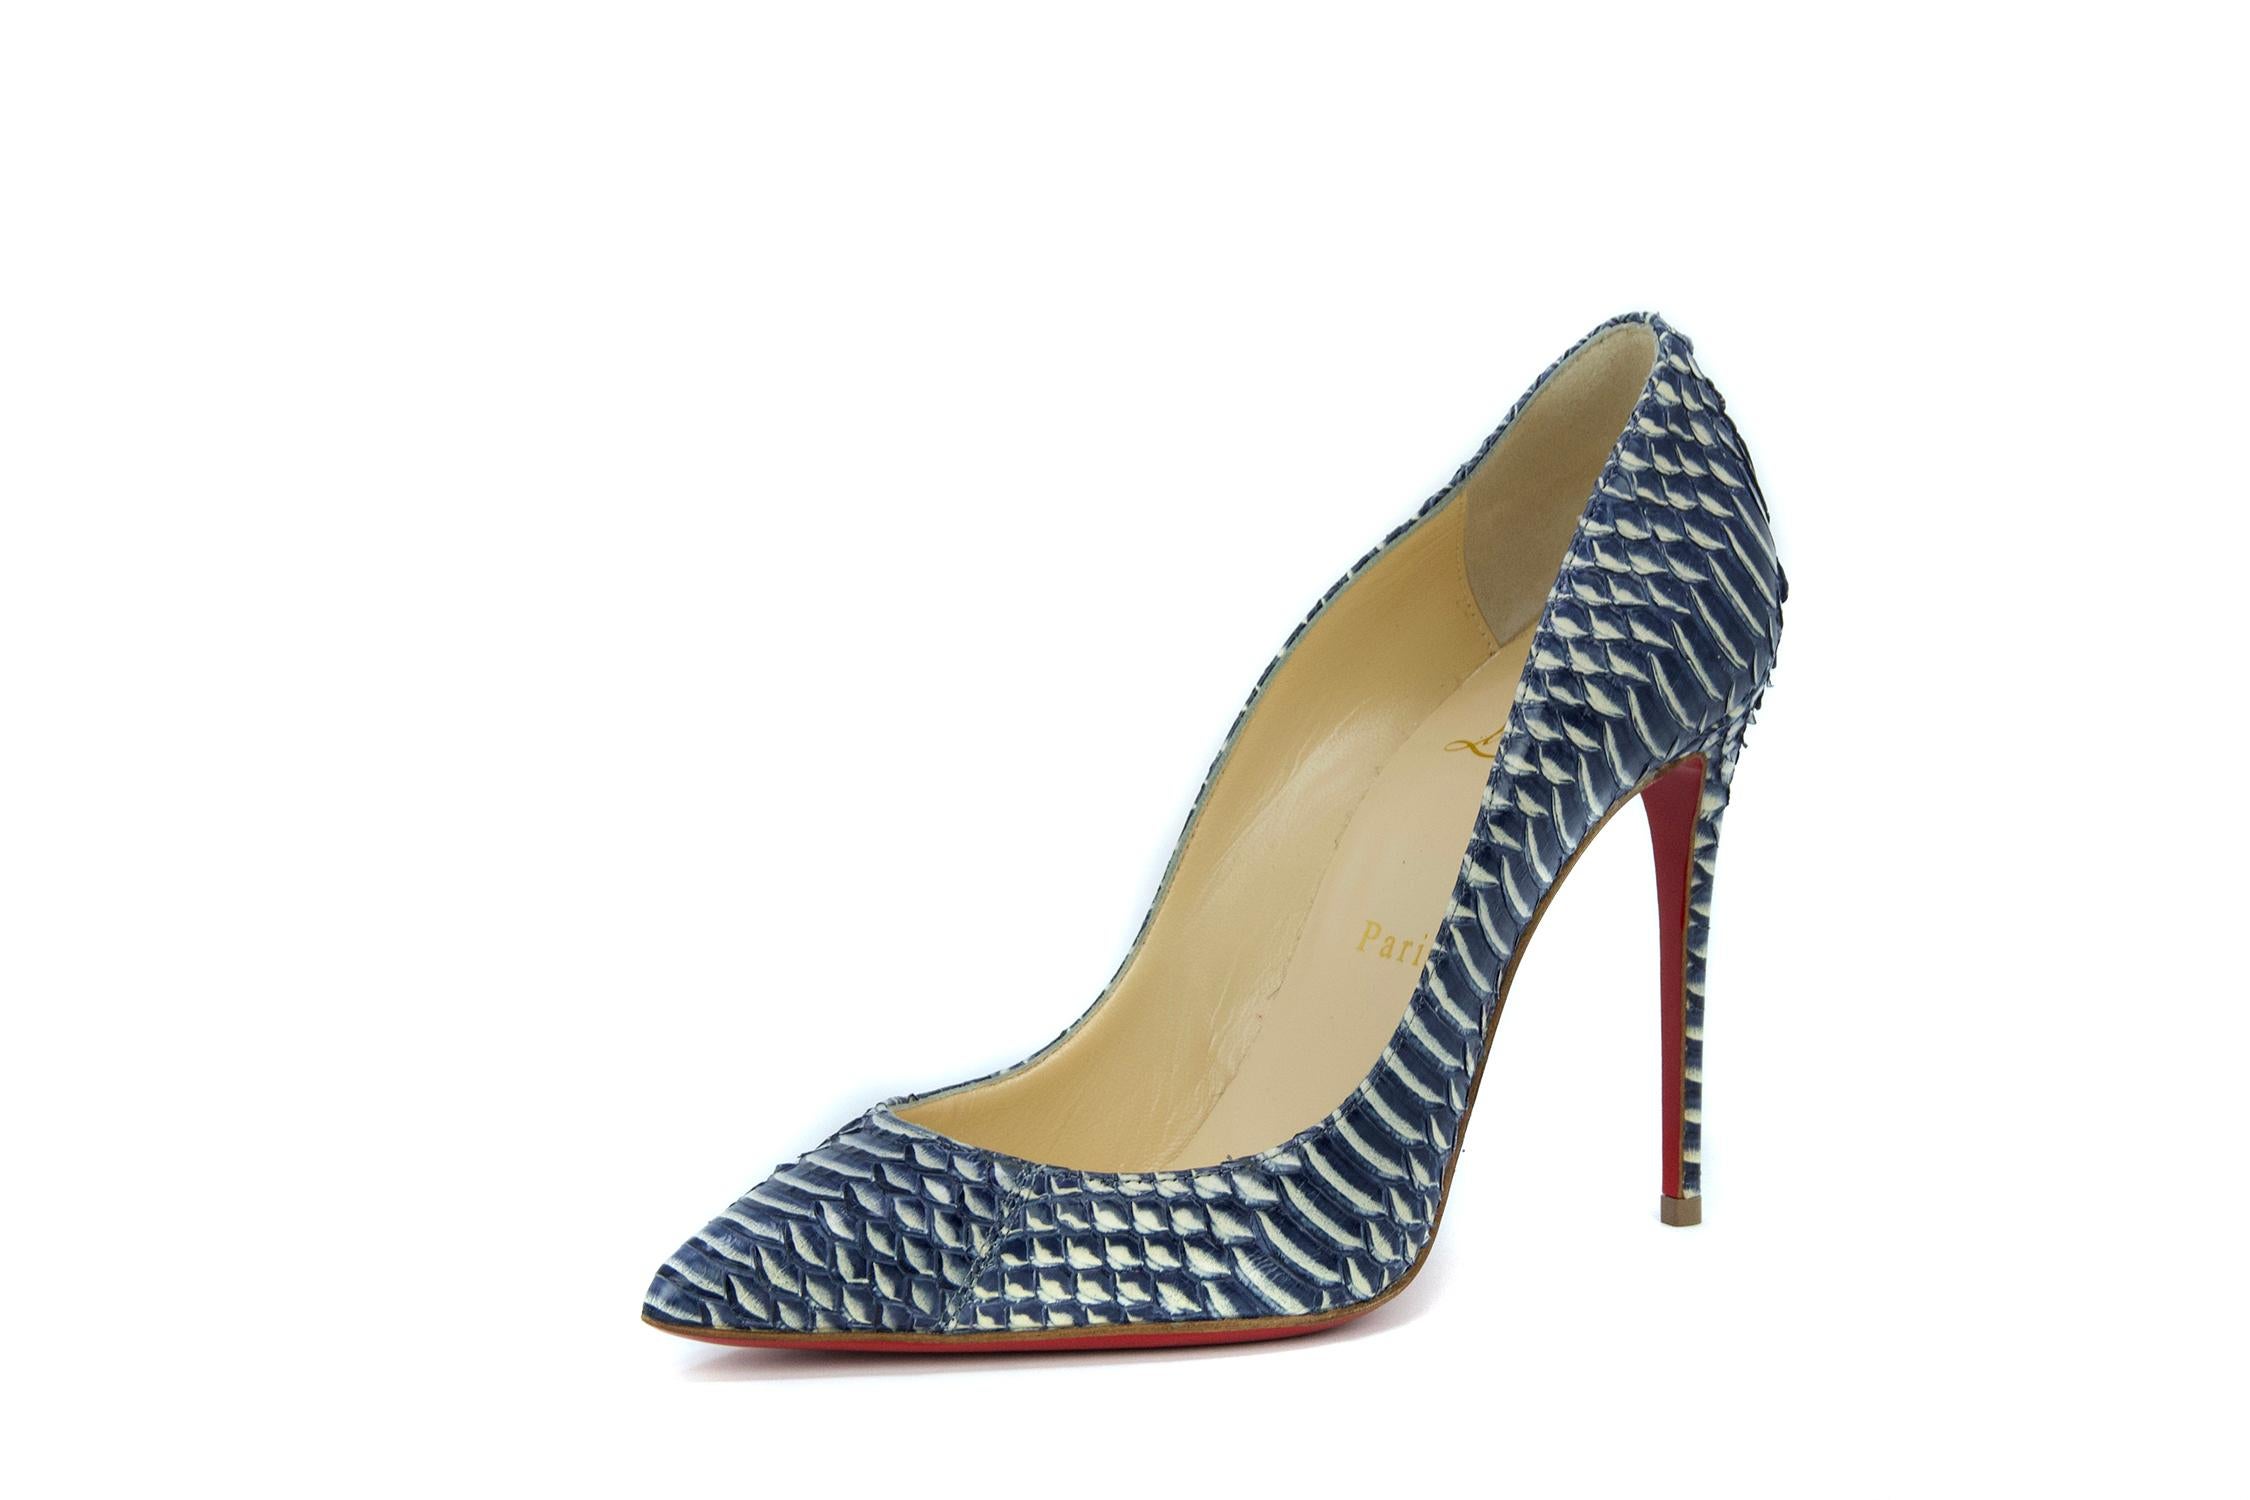 Gorgeous classic Christian Louboutin pump in a black and white snakeskin, that goes with just about anything in your wardrobe.  Iconic red sole that is hard to miss.

Size: 36.5

Condition: New with box and dustbag

Made in Italy